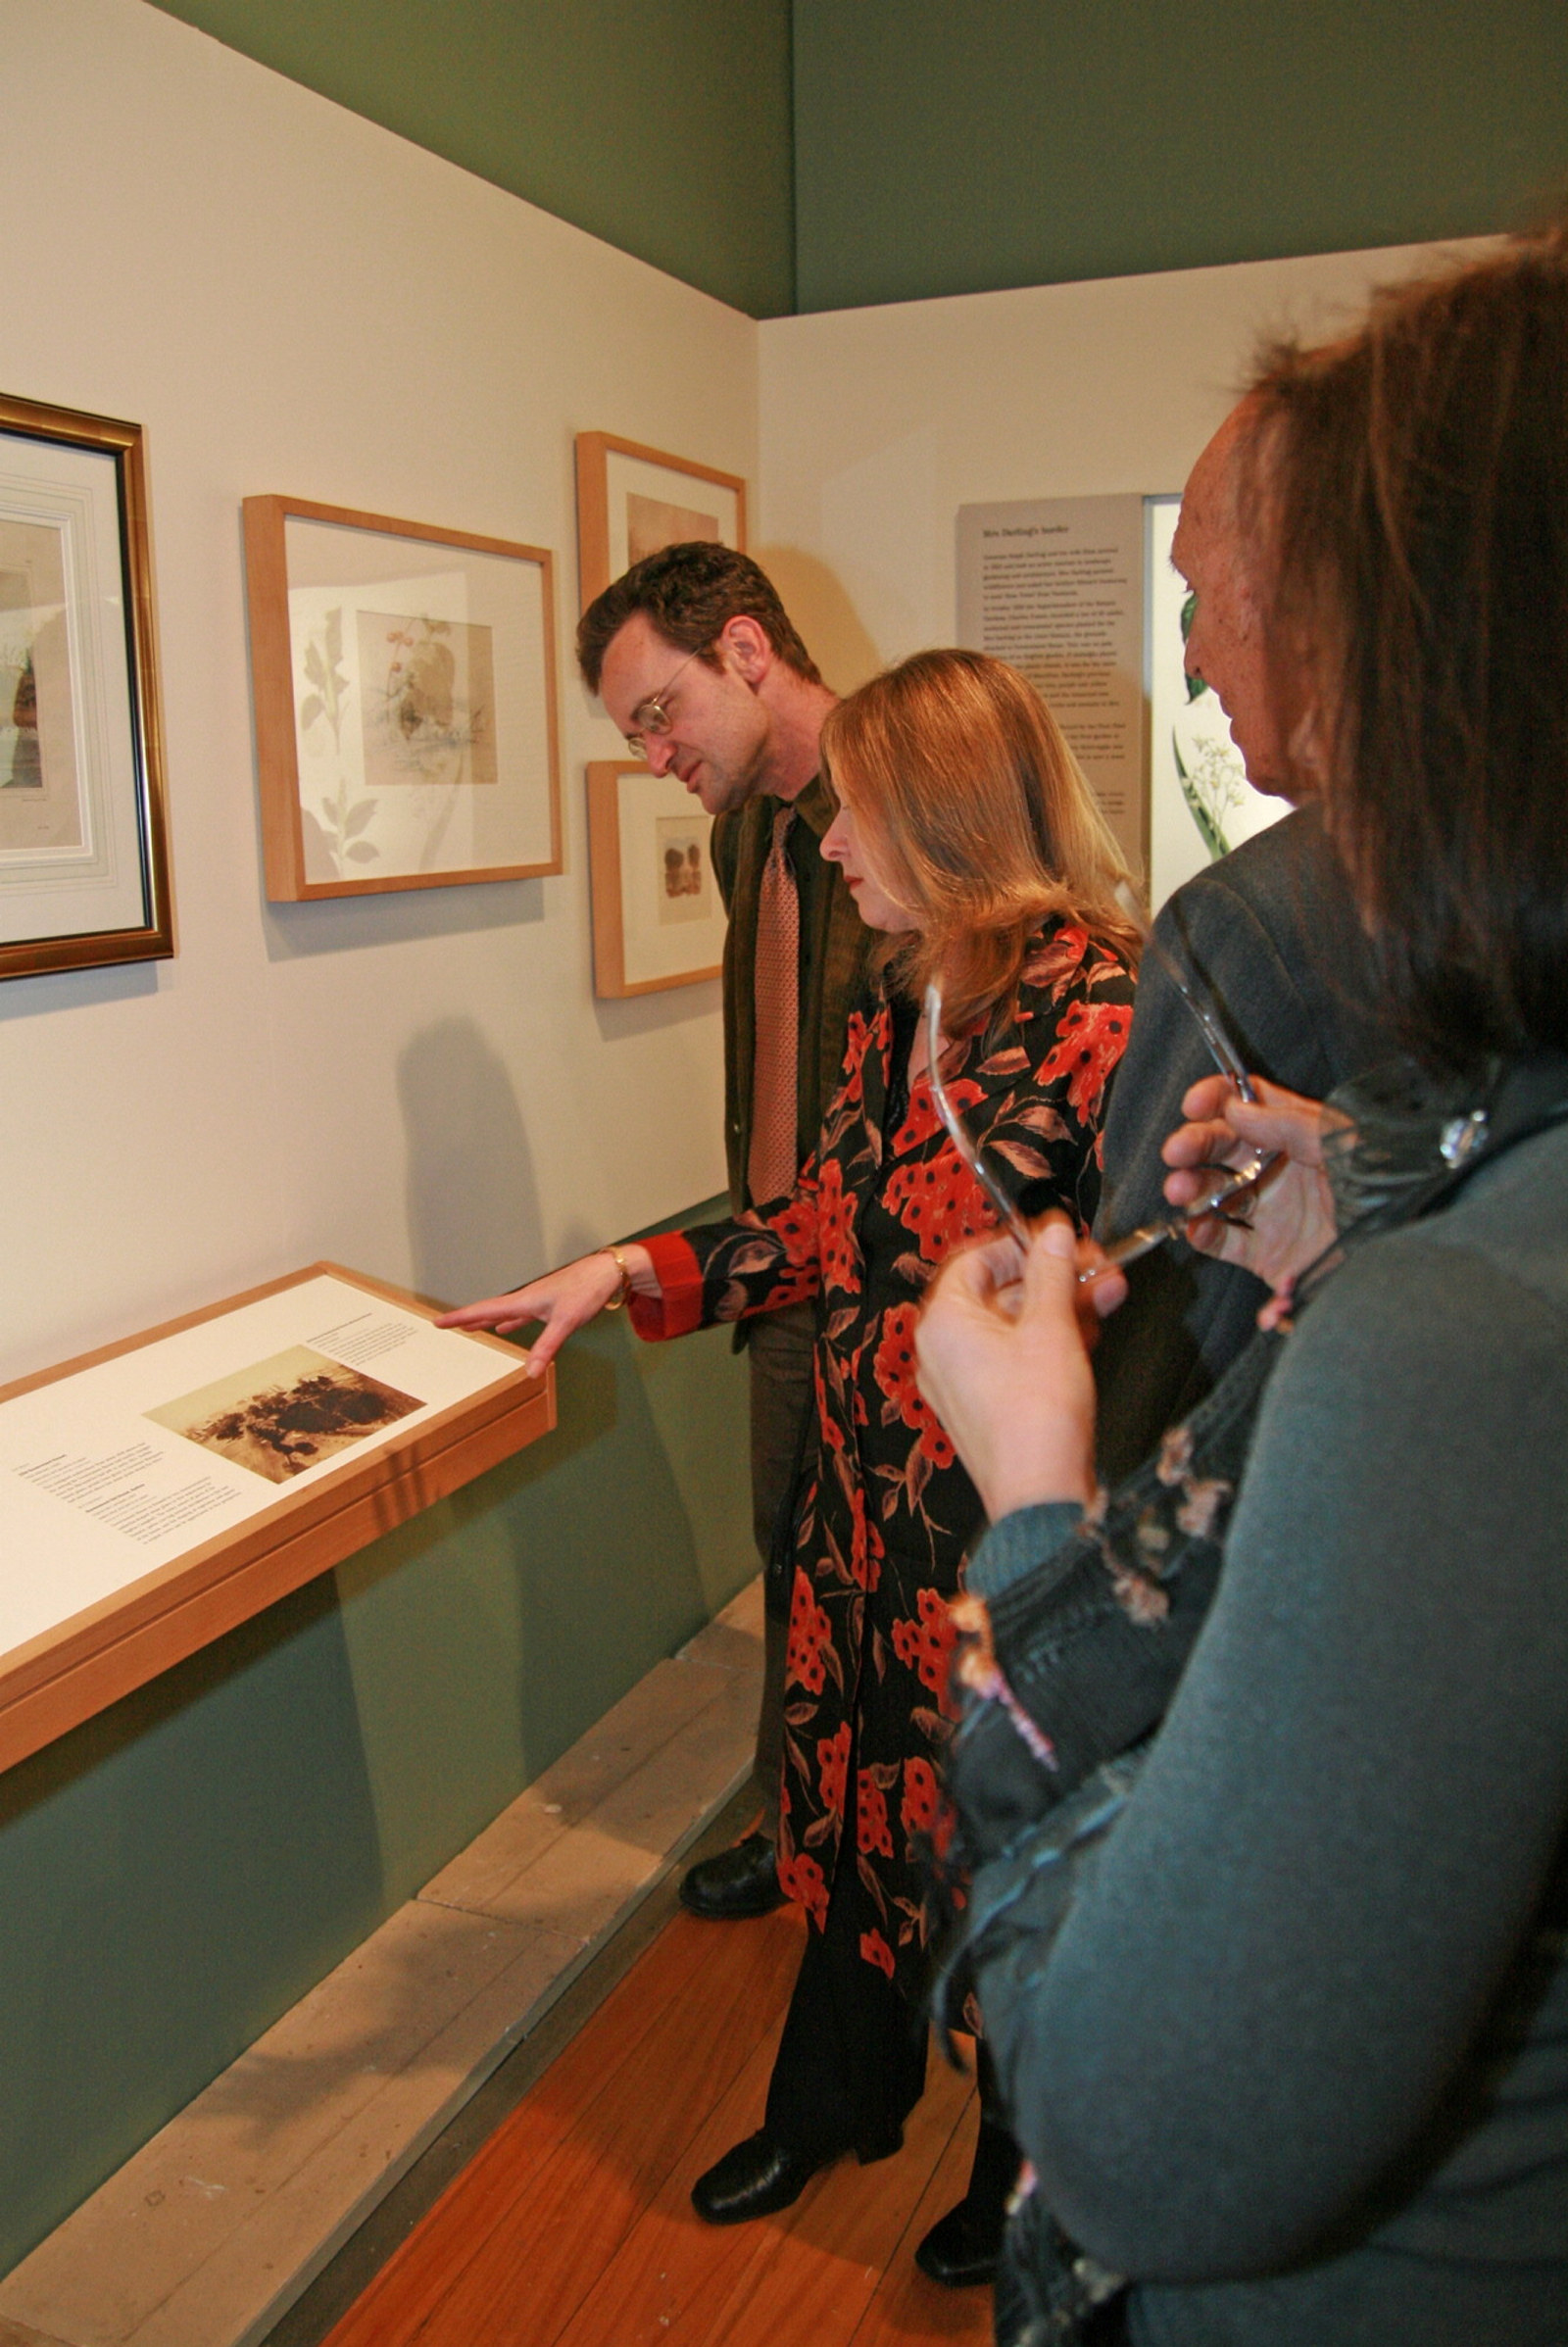 Colleen Morris shows guests through the exhibition